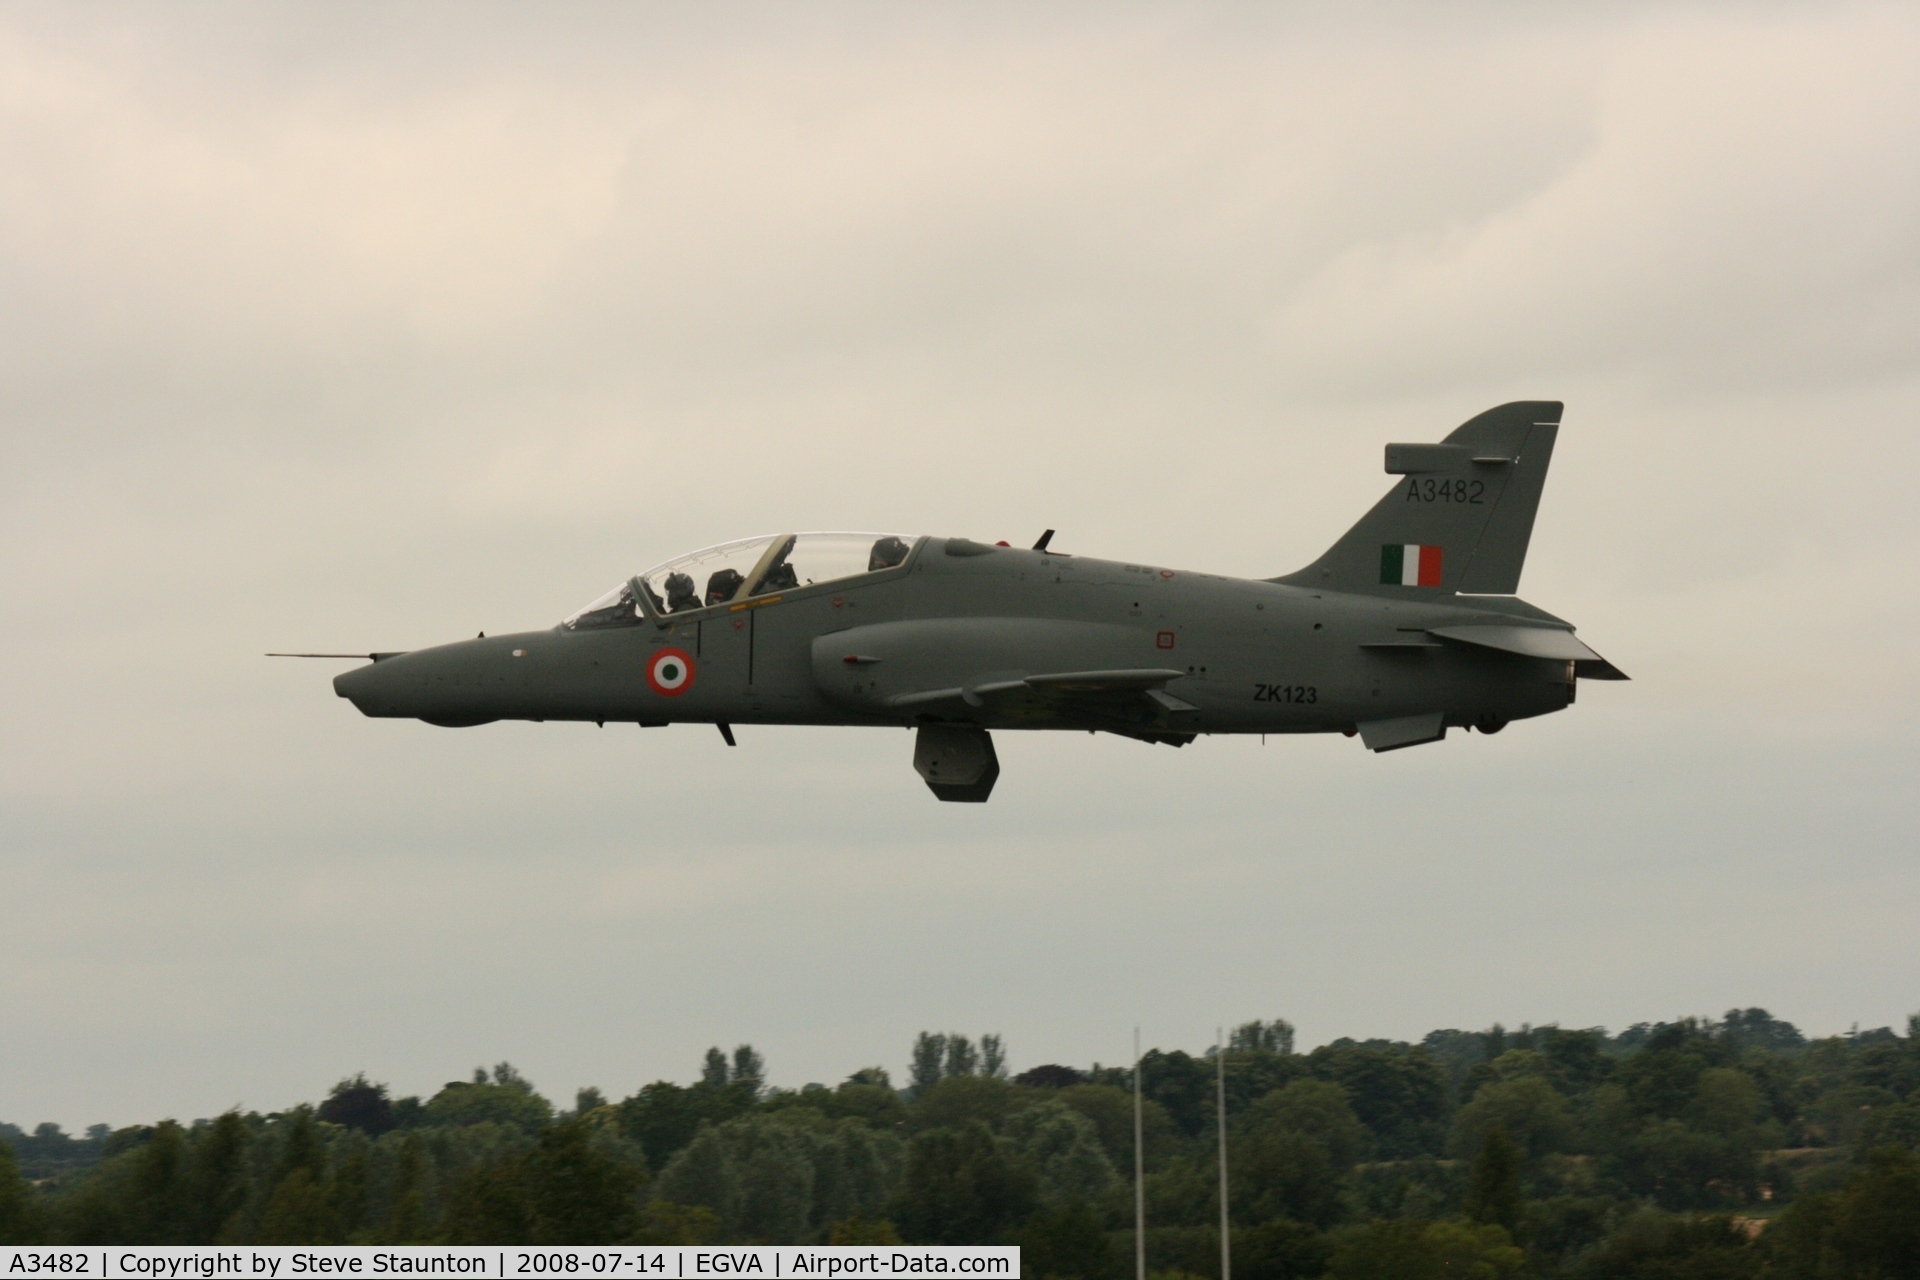 A3482, 2007 British Aerospace Hawk 132 C/N HT003/0903, Taken at the Royal International Air Tattoo 2008 during arrivals and departures (show days cancelled due to bad weather)